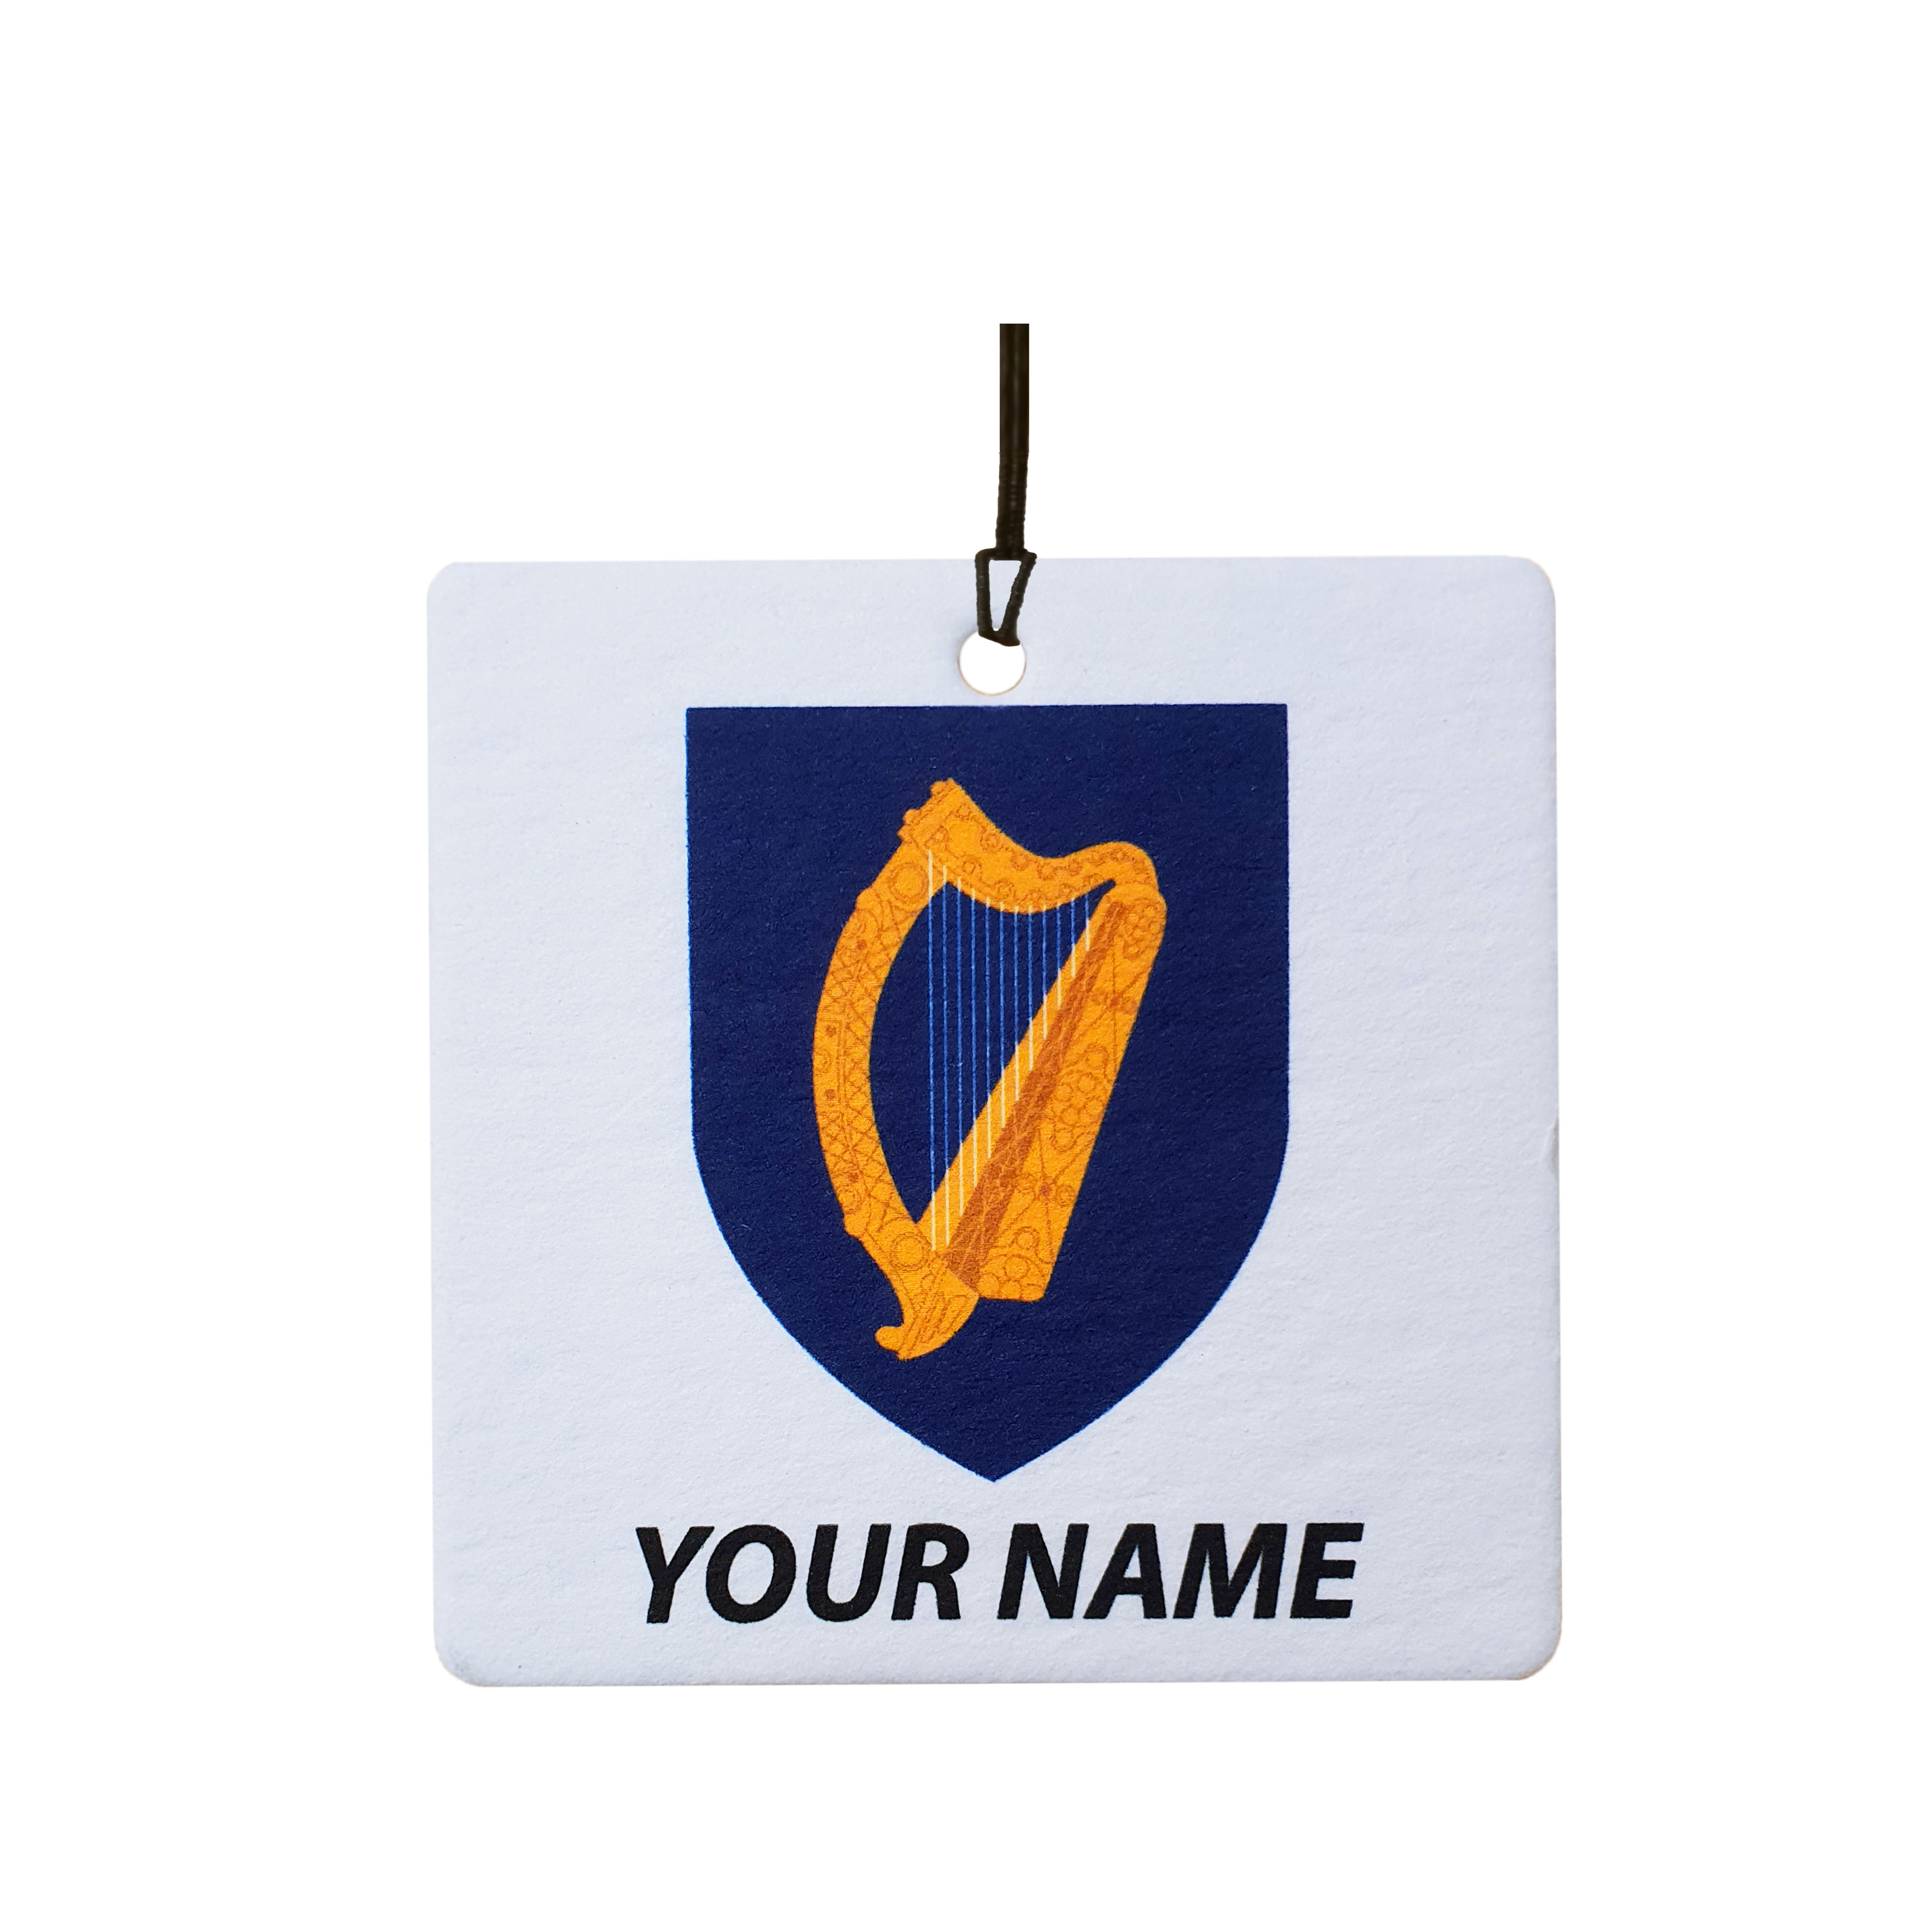 Personalised Ireland Coat of Arms